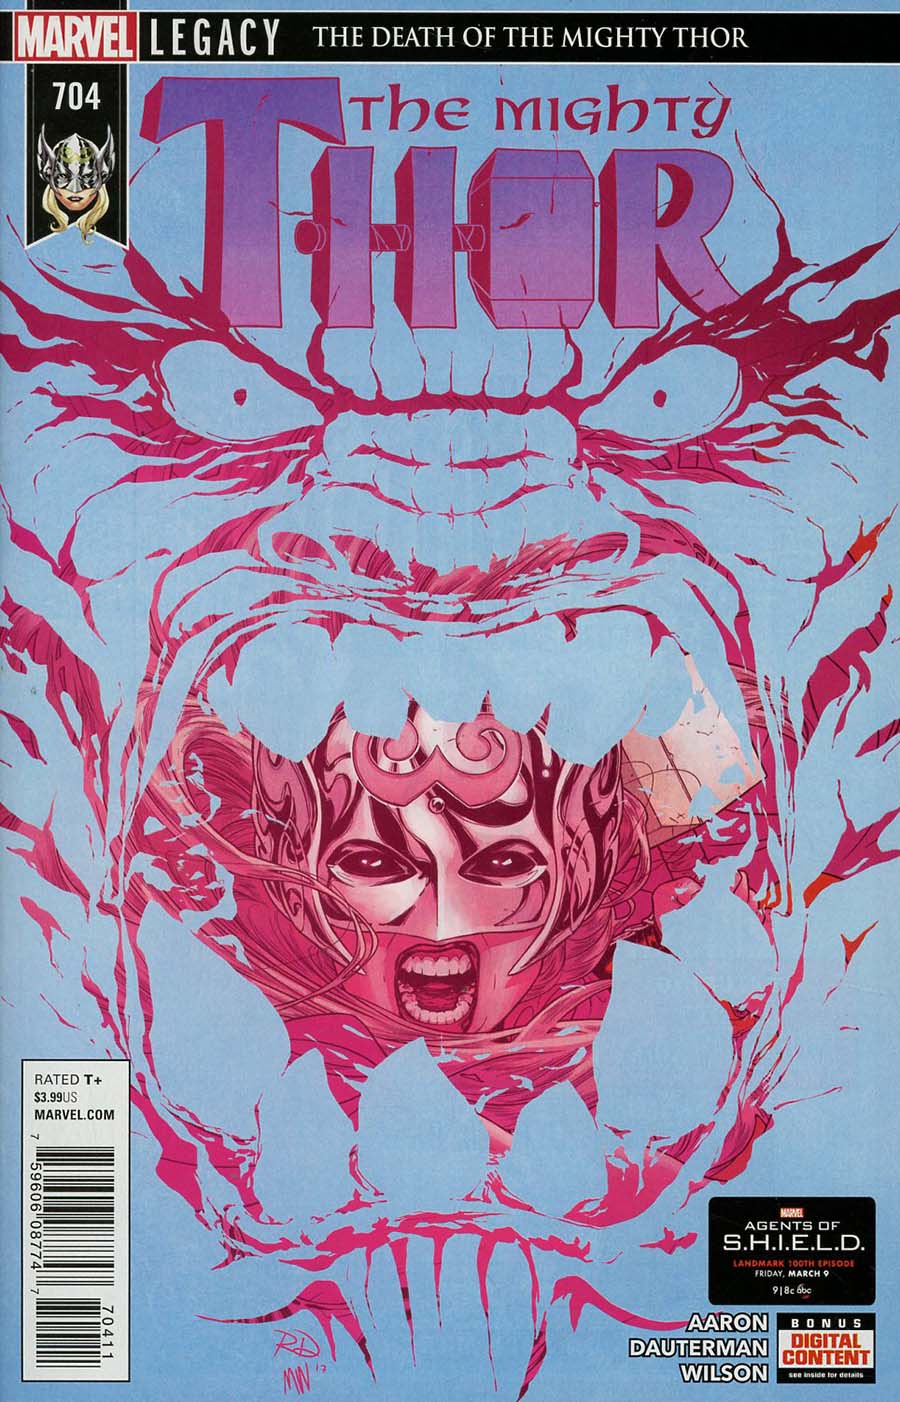 Mighty Thor Vol 2 #704 Cover A Regular Russell Dauterman Cover (Marvel Legacy Tie-In)